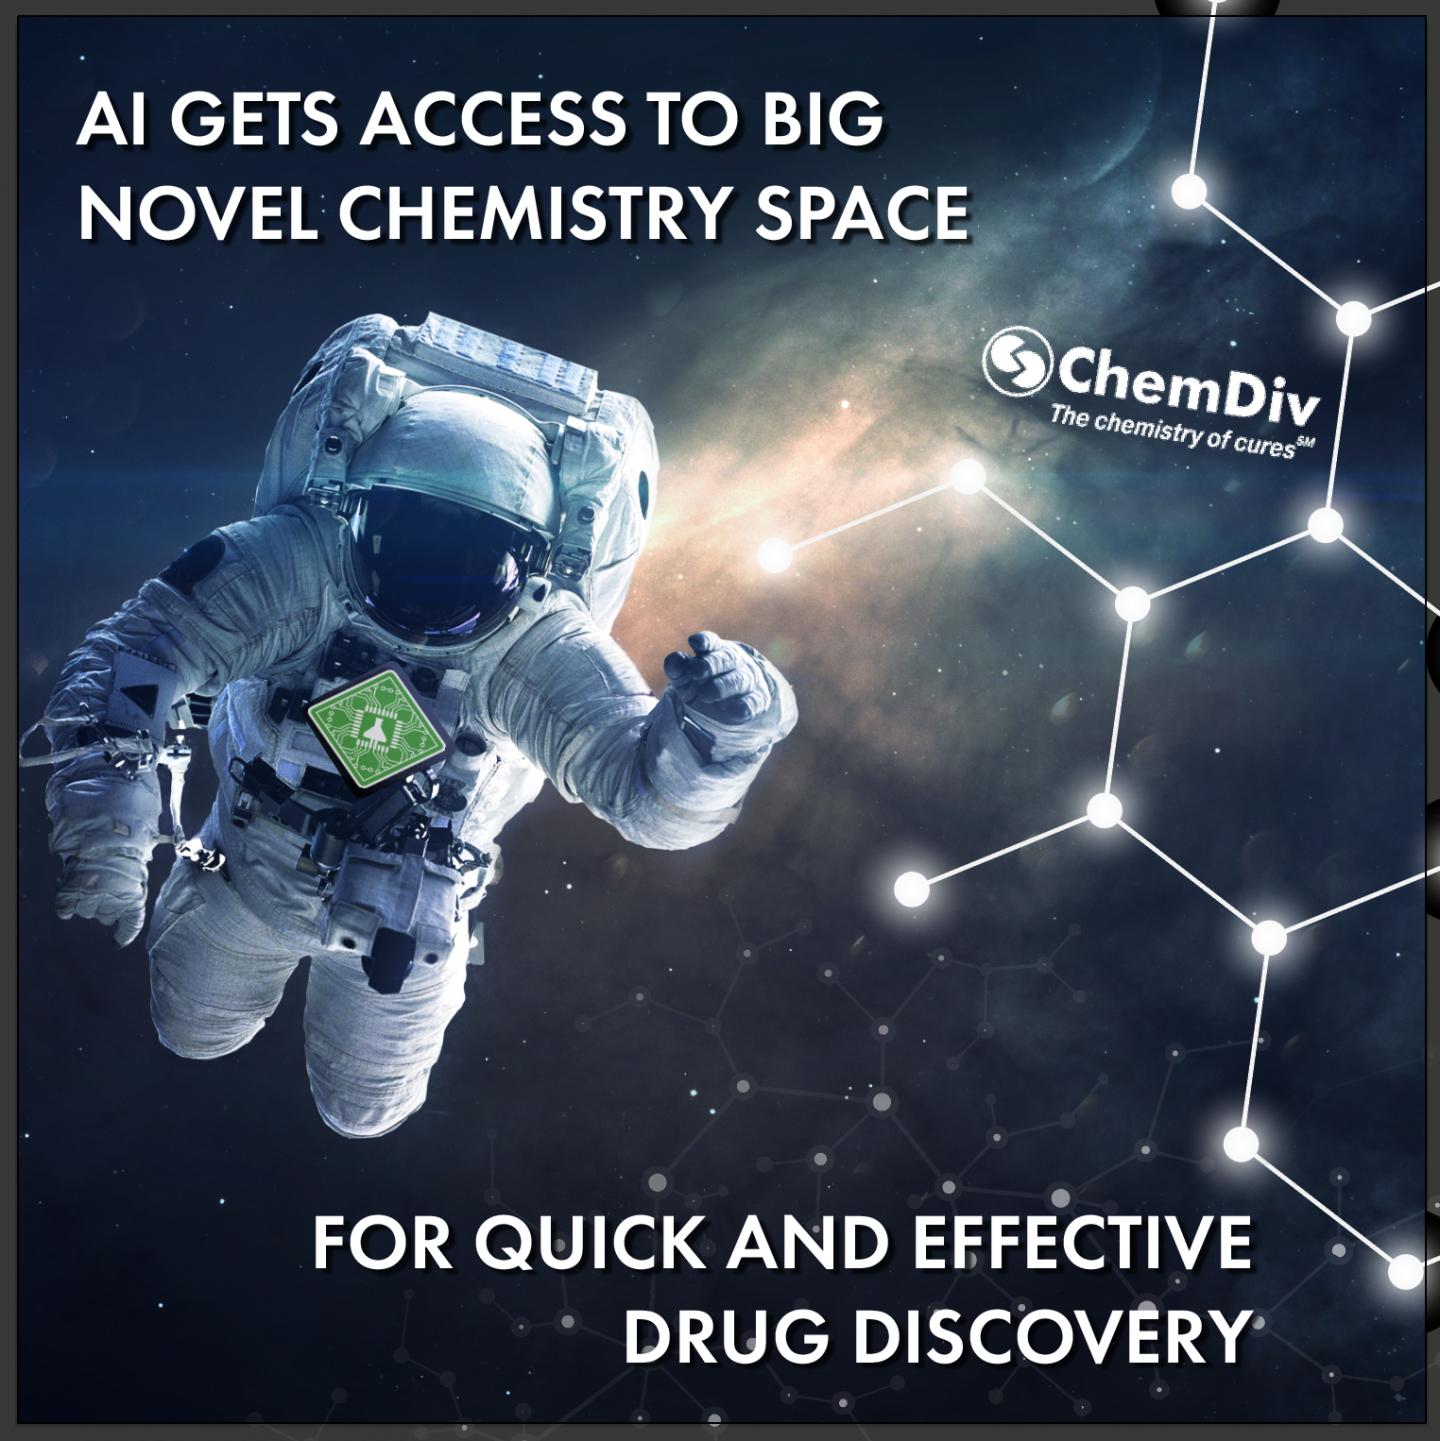 AI Gets Access to Big Novel Chemistry Space for Quick and Effective Drug Discovery